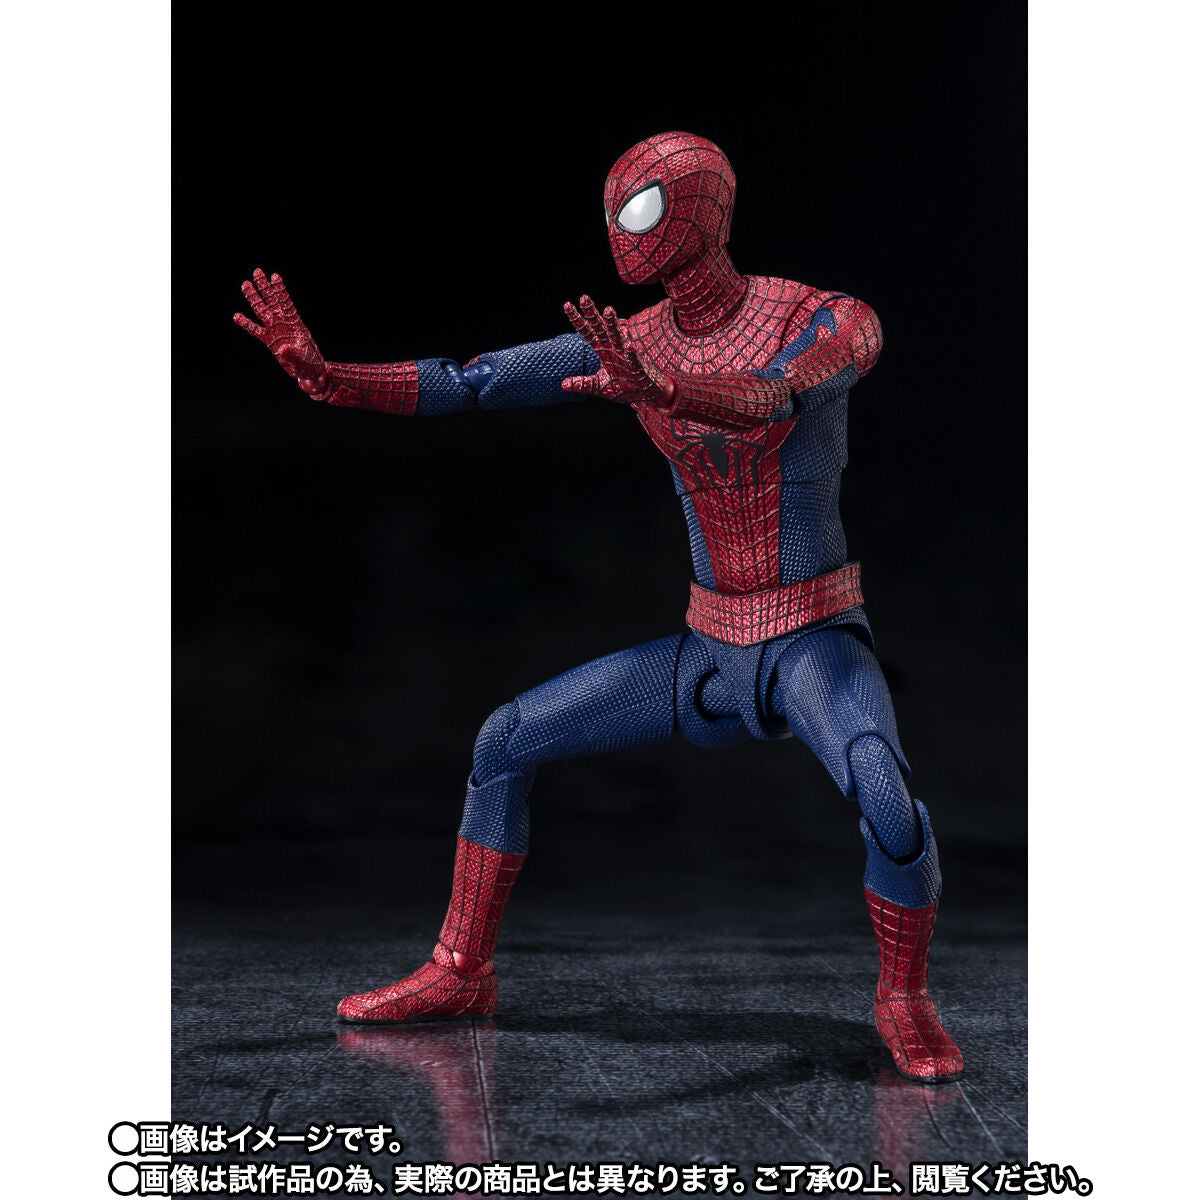 [PREORDER] SH Figuarts The Amazing Spider-Man v2